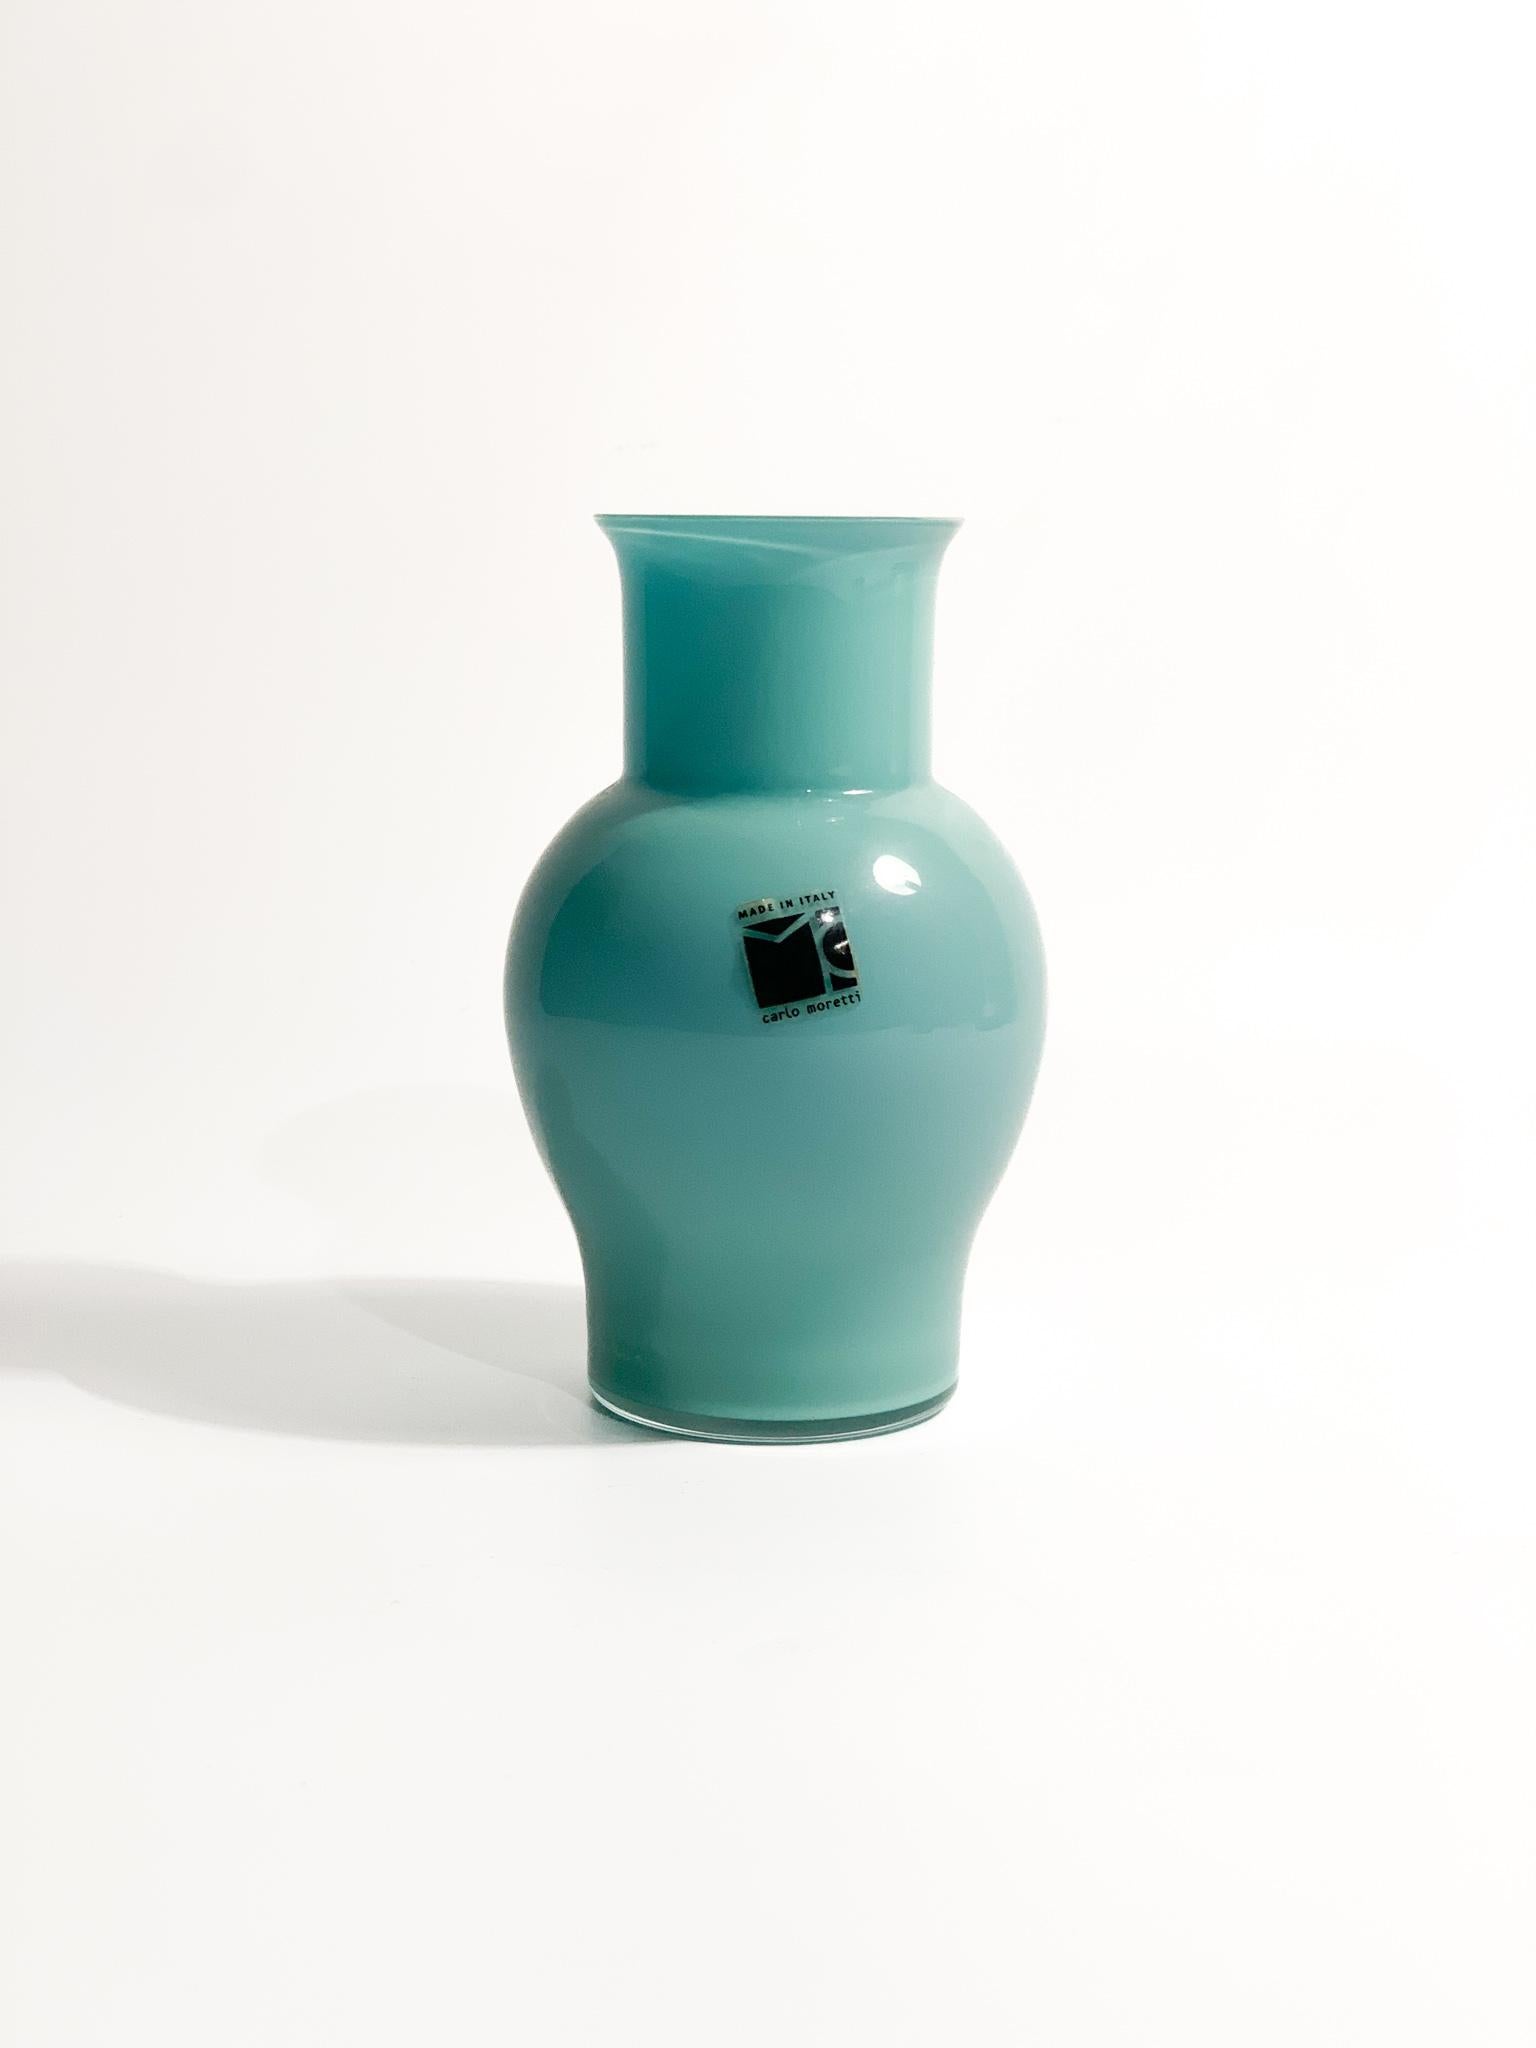 Opaline vase in light blue Murano glass, made by Caldo Moretti in the 1980s

Ø cm 8 h cm 13

Carlo Nason, born in Murano in 1935 from one of the oldest families of glassmakers on the island, he was a great master glassmaker. He grows up frequenting